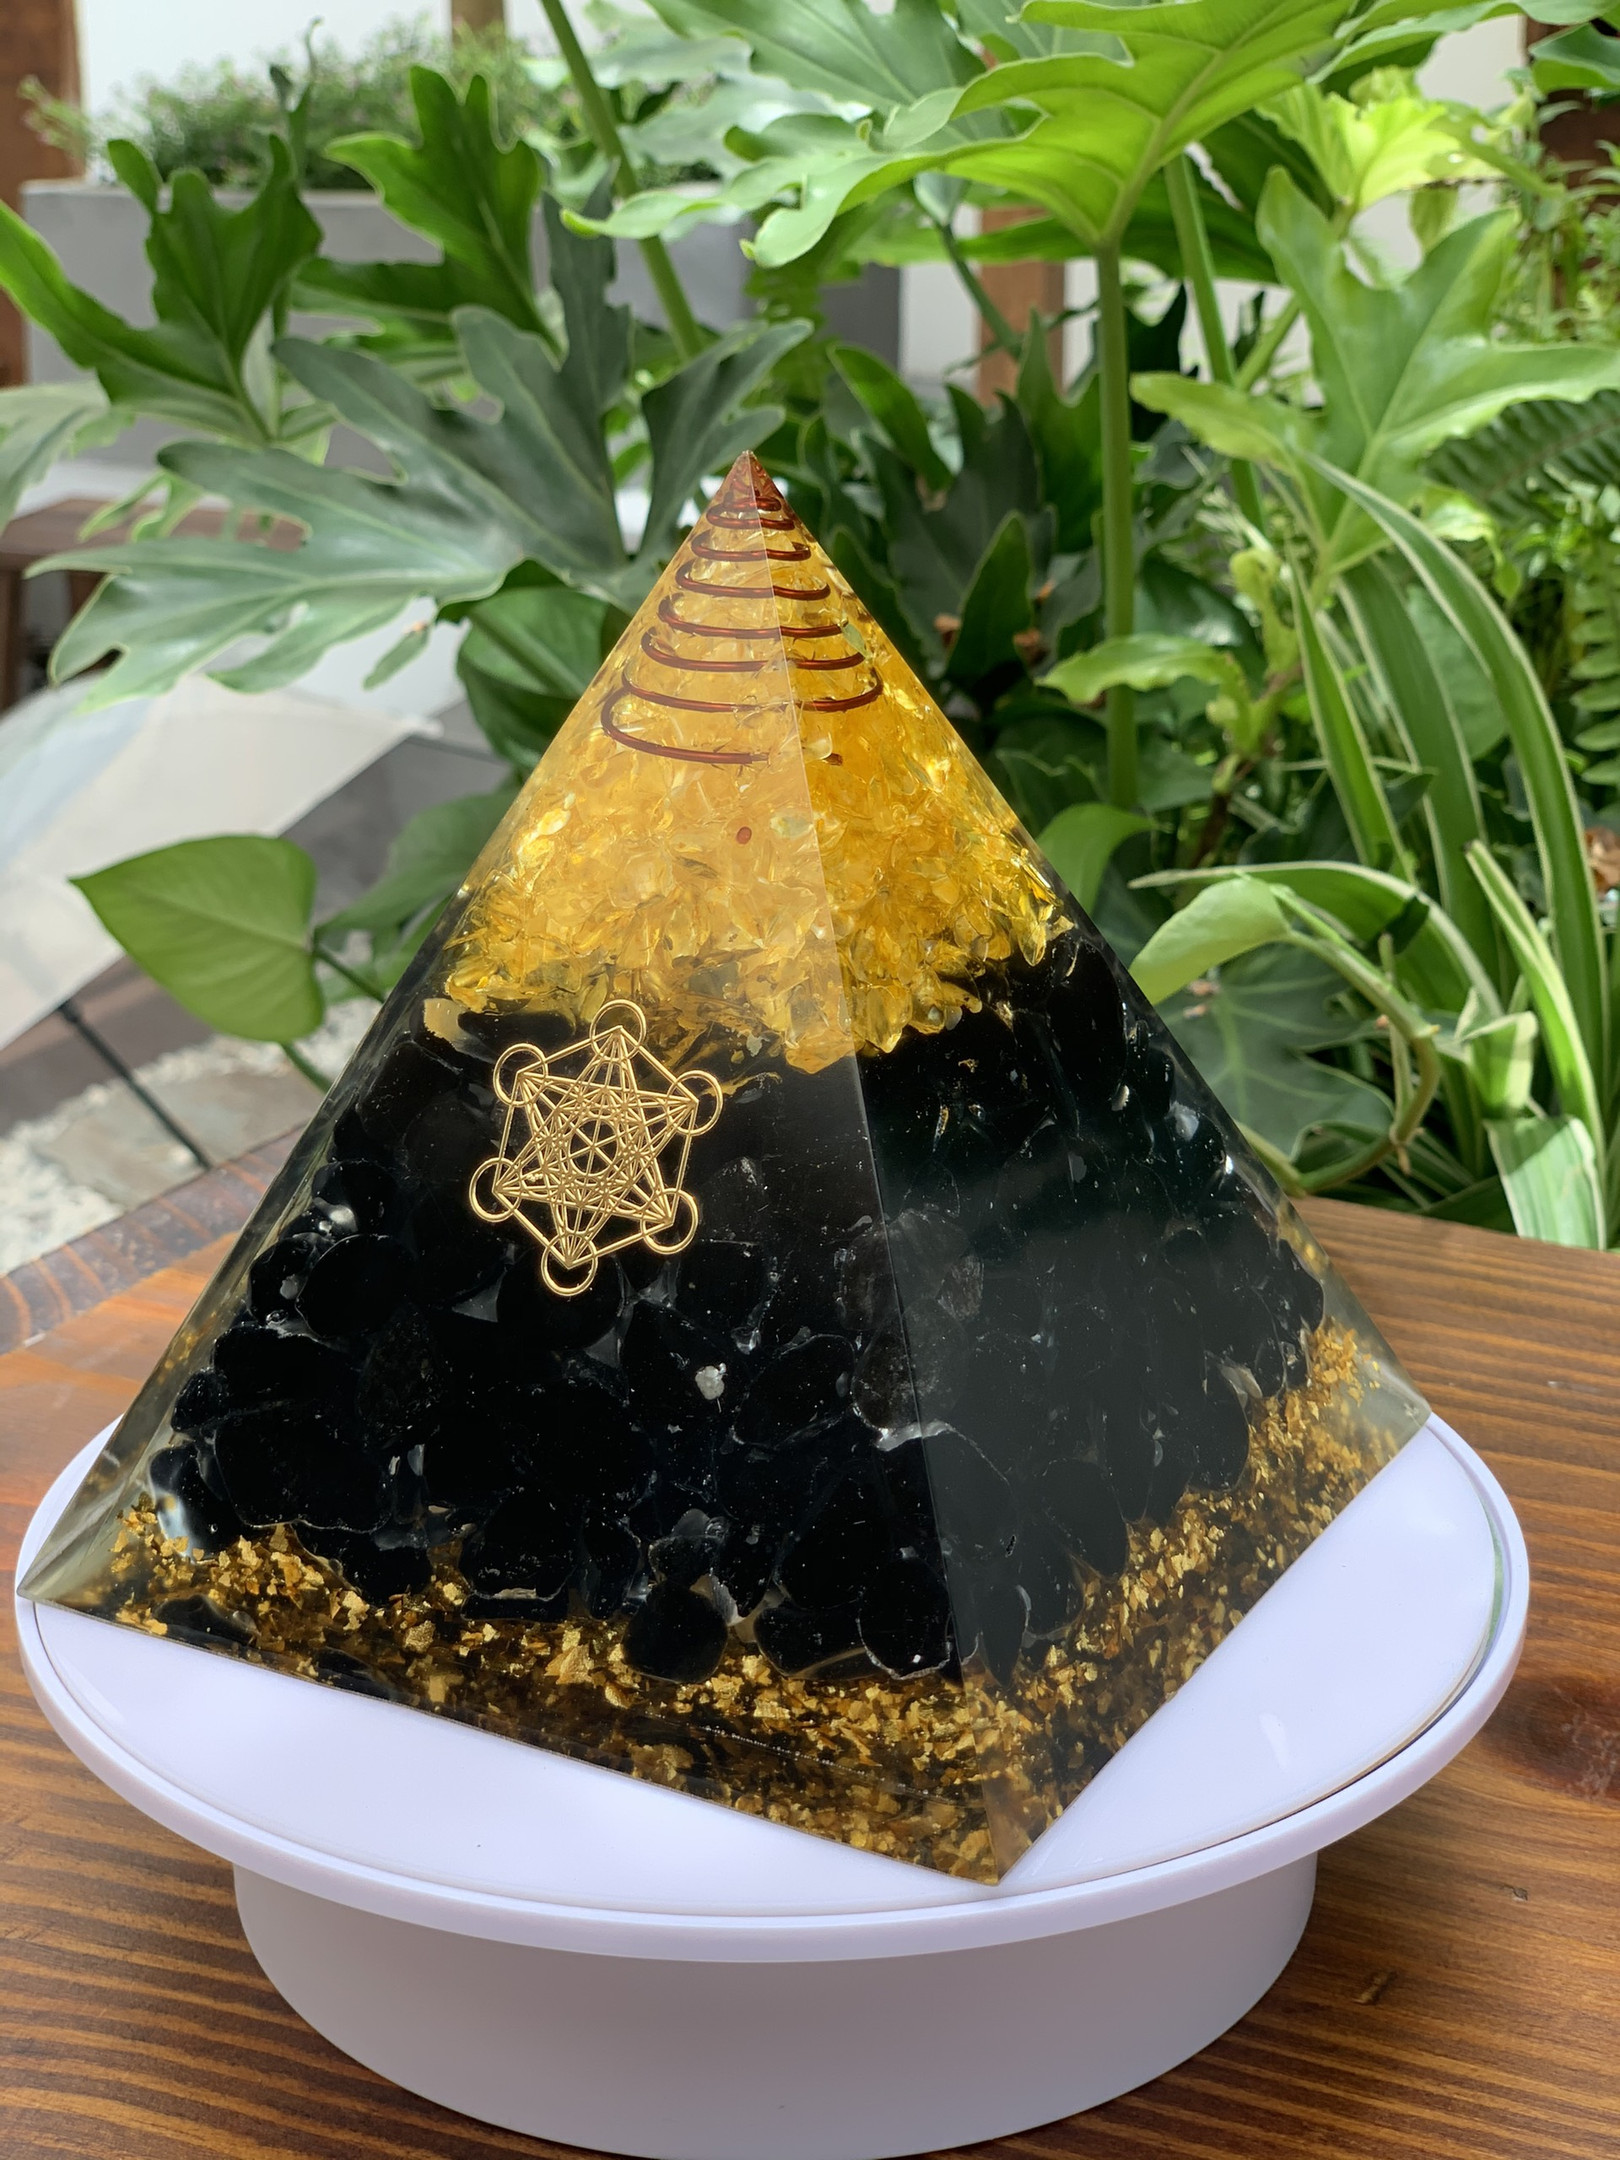 Feng shui stone pyramid products